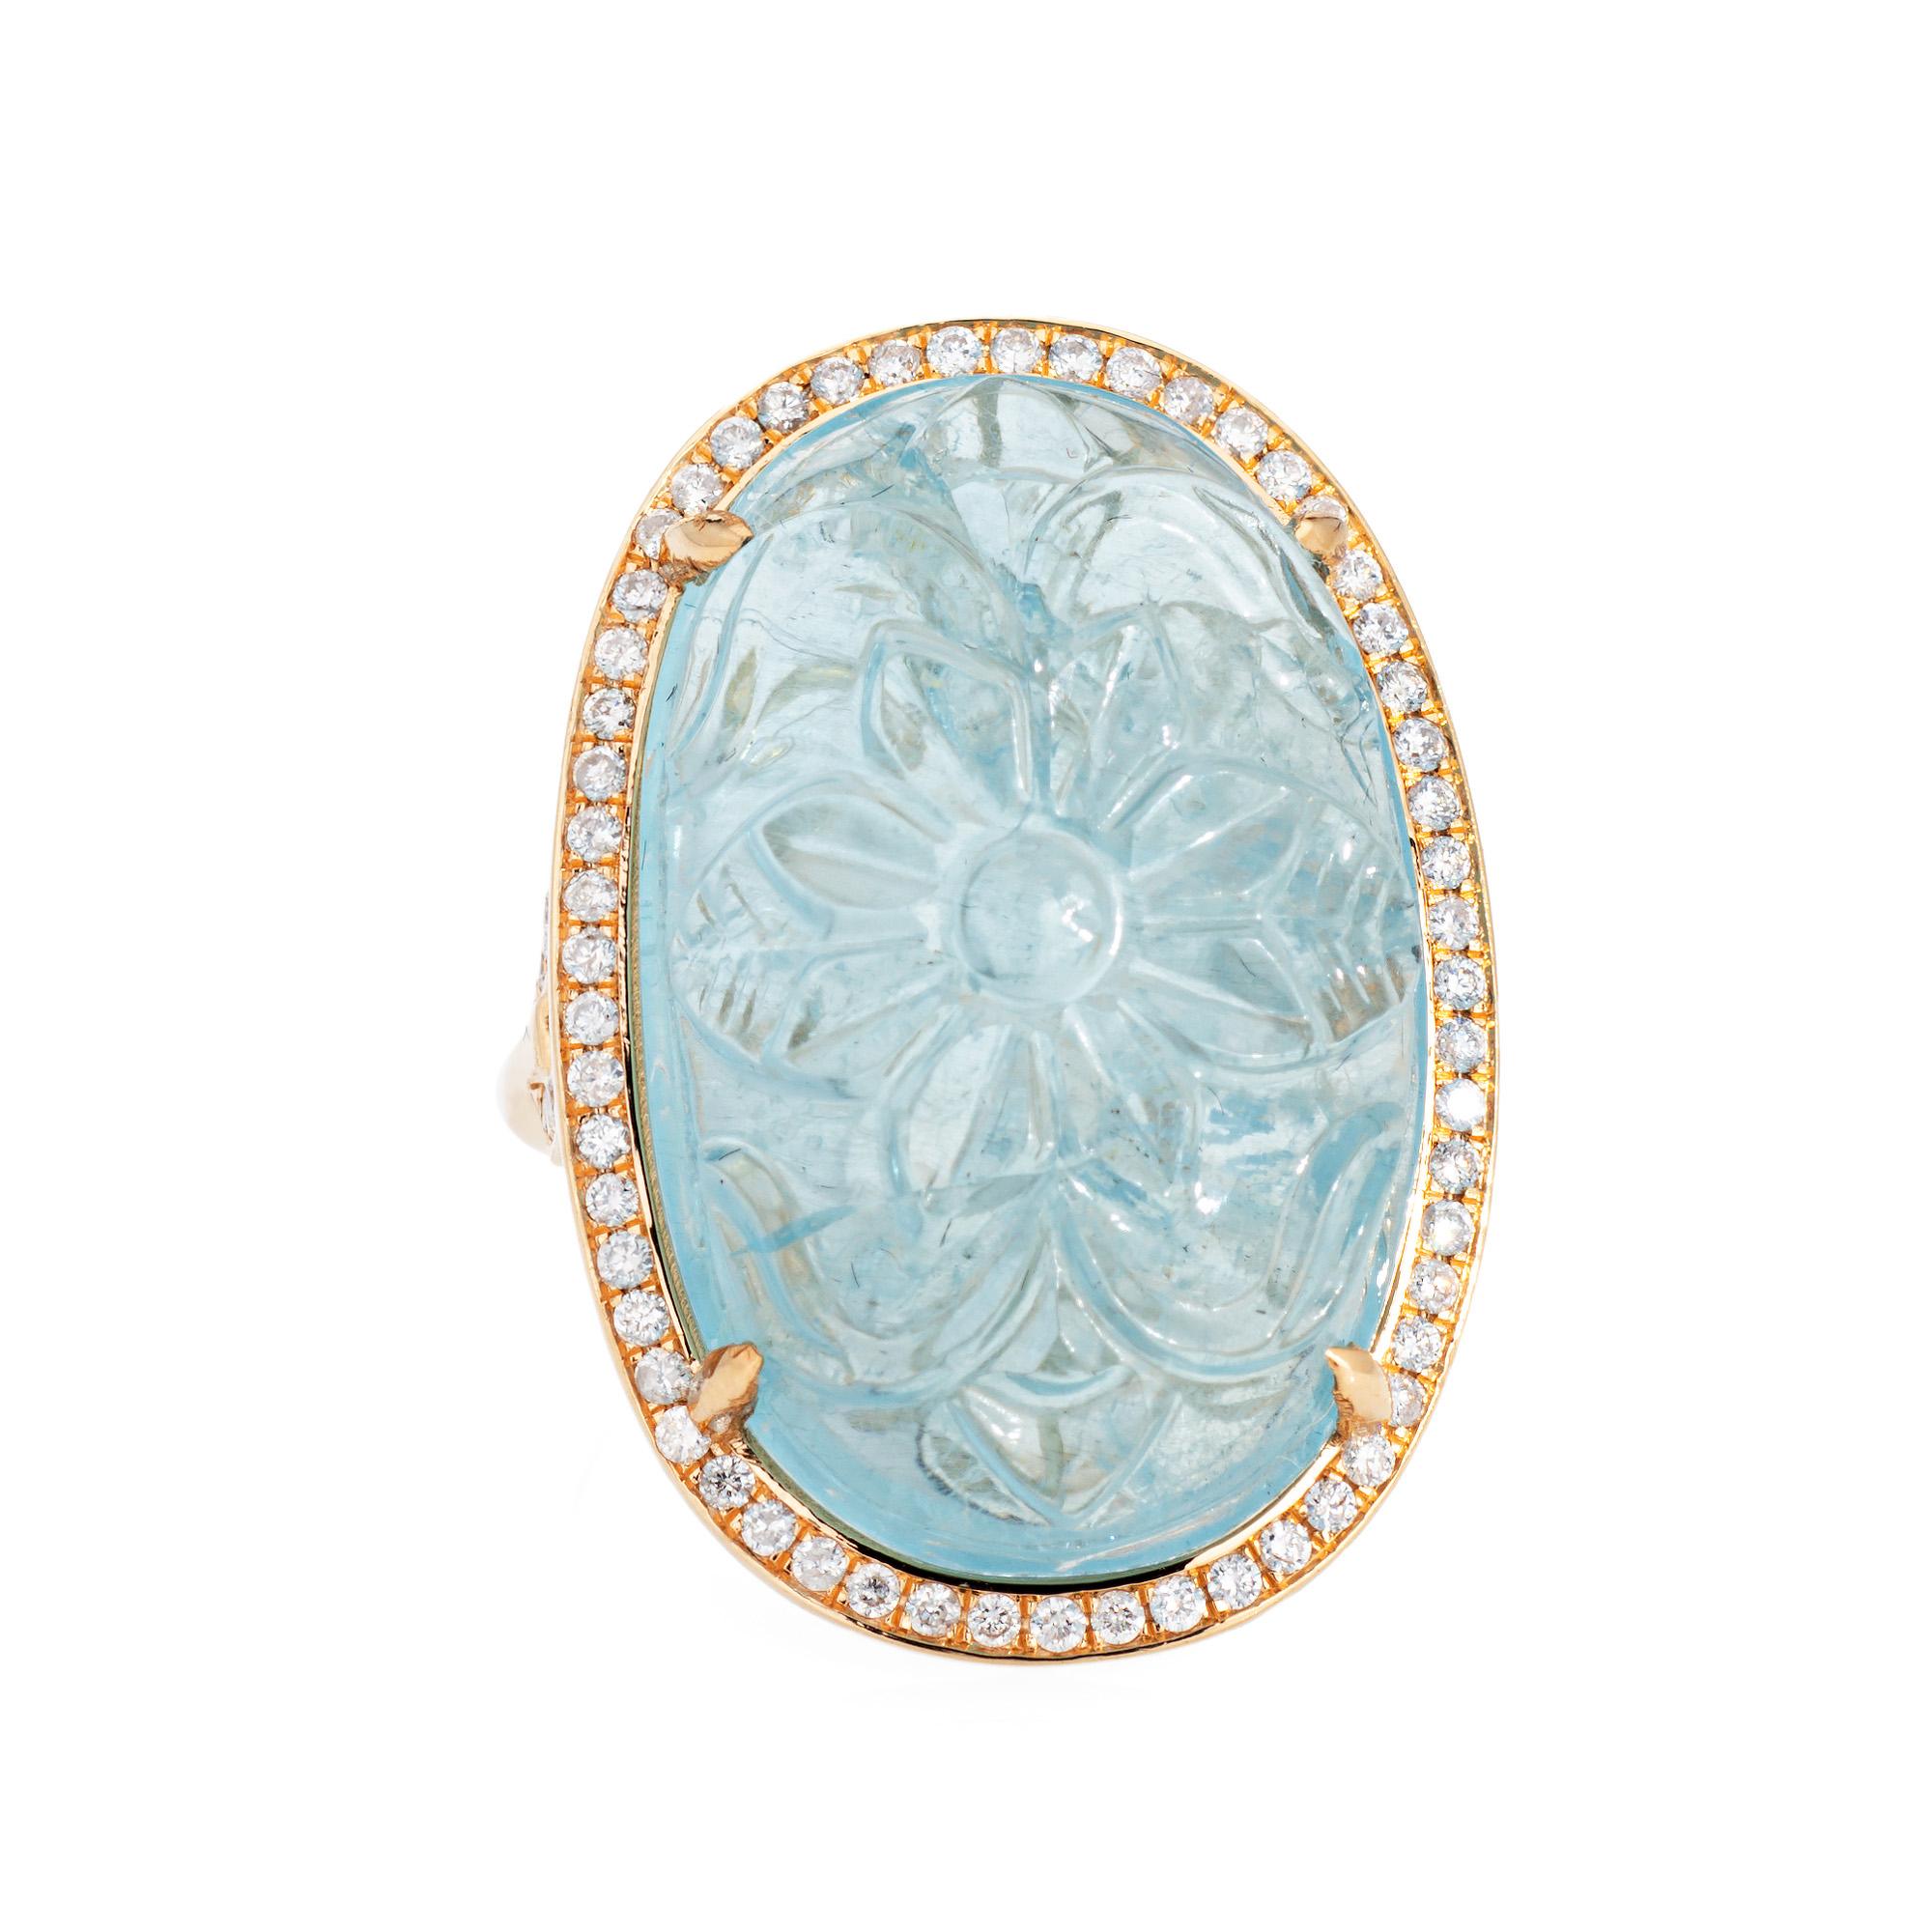 Stylish estate carved aquamarine & diamond cocktail ring crafted in 18k yellow gold. 

Carved aquamarine measures 25mm x 16mm (estimated at 33 carats). Diamonds total an estimated 0.35 carats (estimated at I-J color and SI1-I2 clarity). 

The light